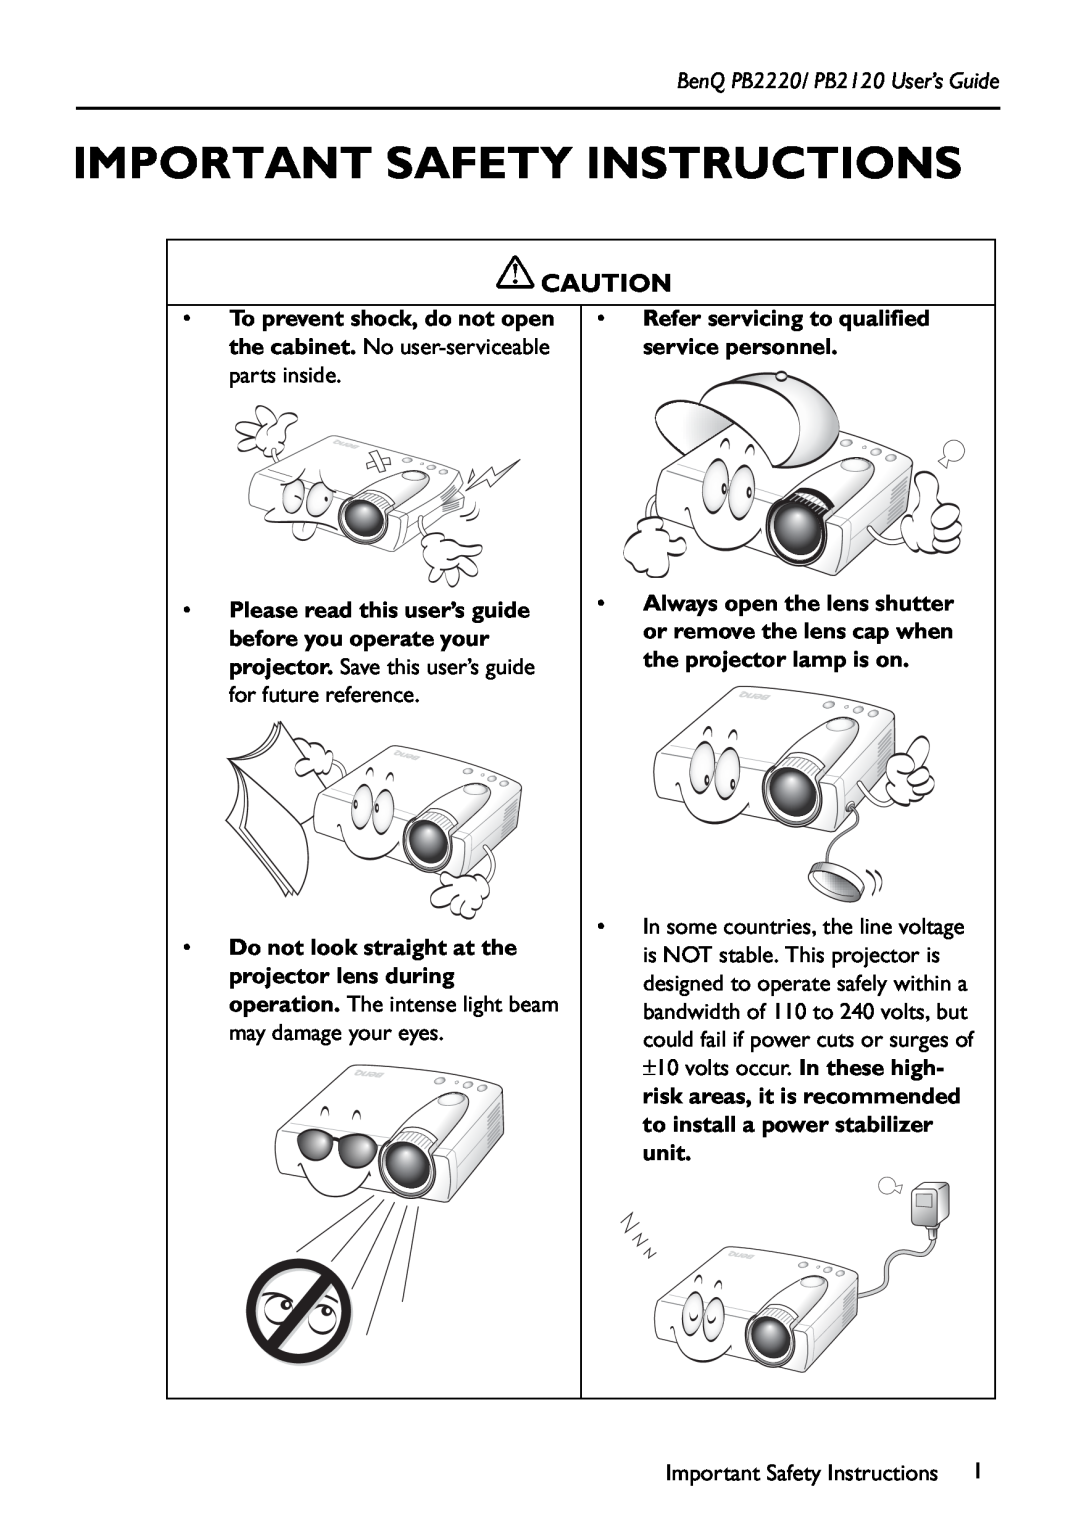 BenQ manual Important Safety Instructions, BenQ PB2220/ PB2120 User’s Guide 